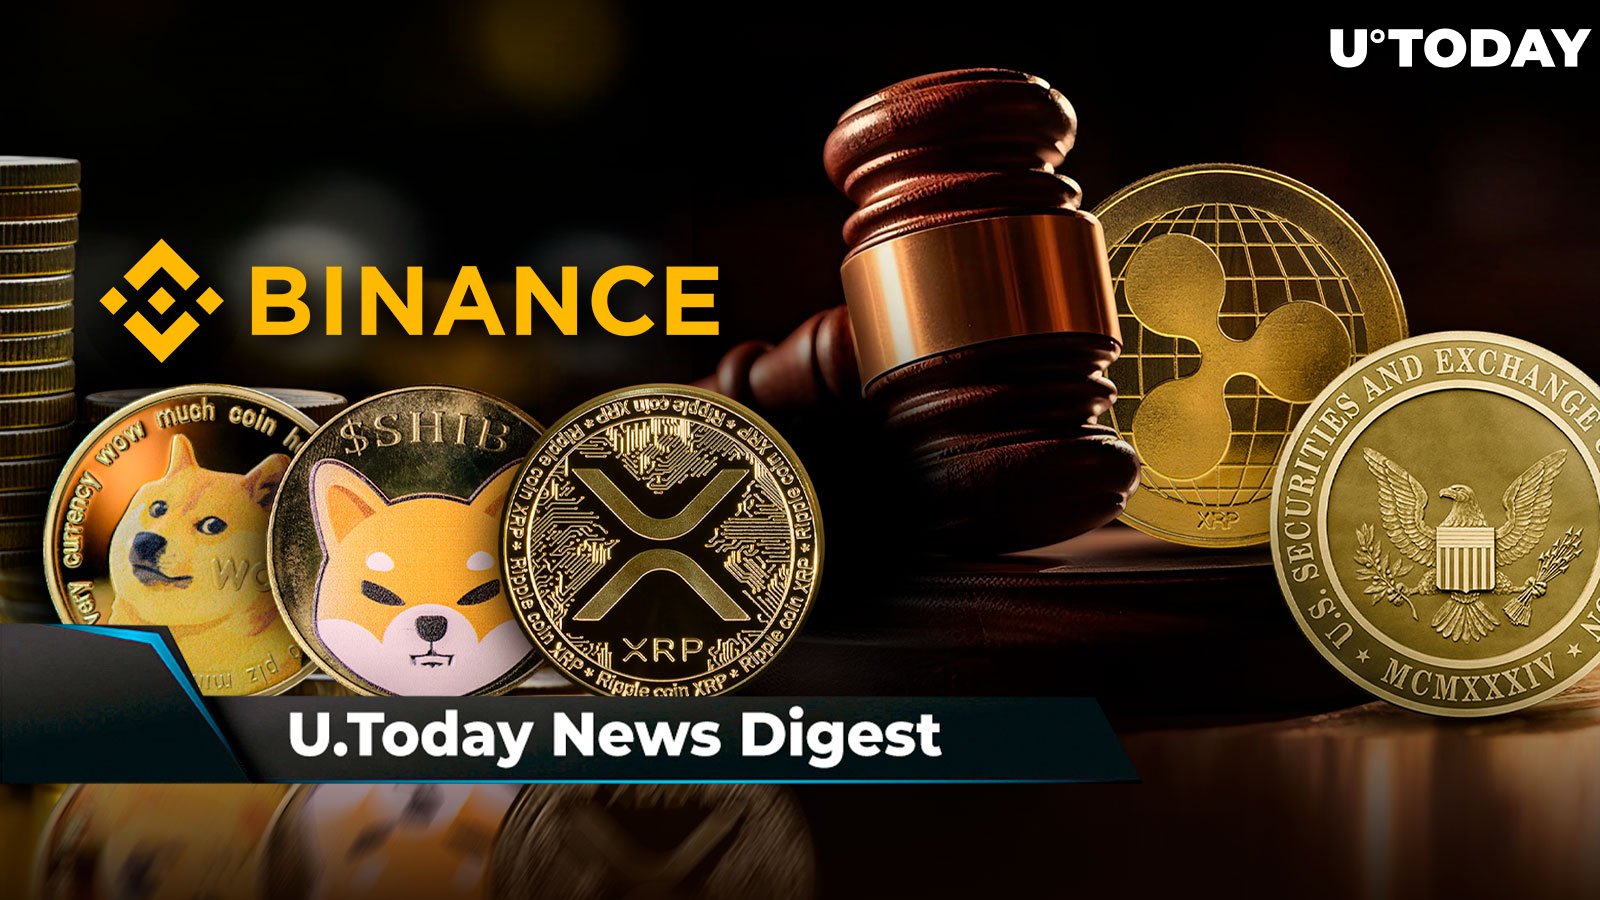 Binance DOGE, SHIB and XRP Reserves Top 100%, Ripple Files Crucial Request in SEC Lawsuit, Bitcoin Wallet Activity Dips Despite ETF Approvals: Crypto News Digest by U.Today